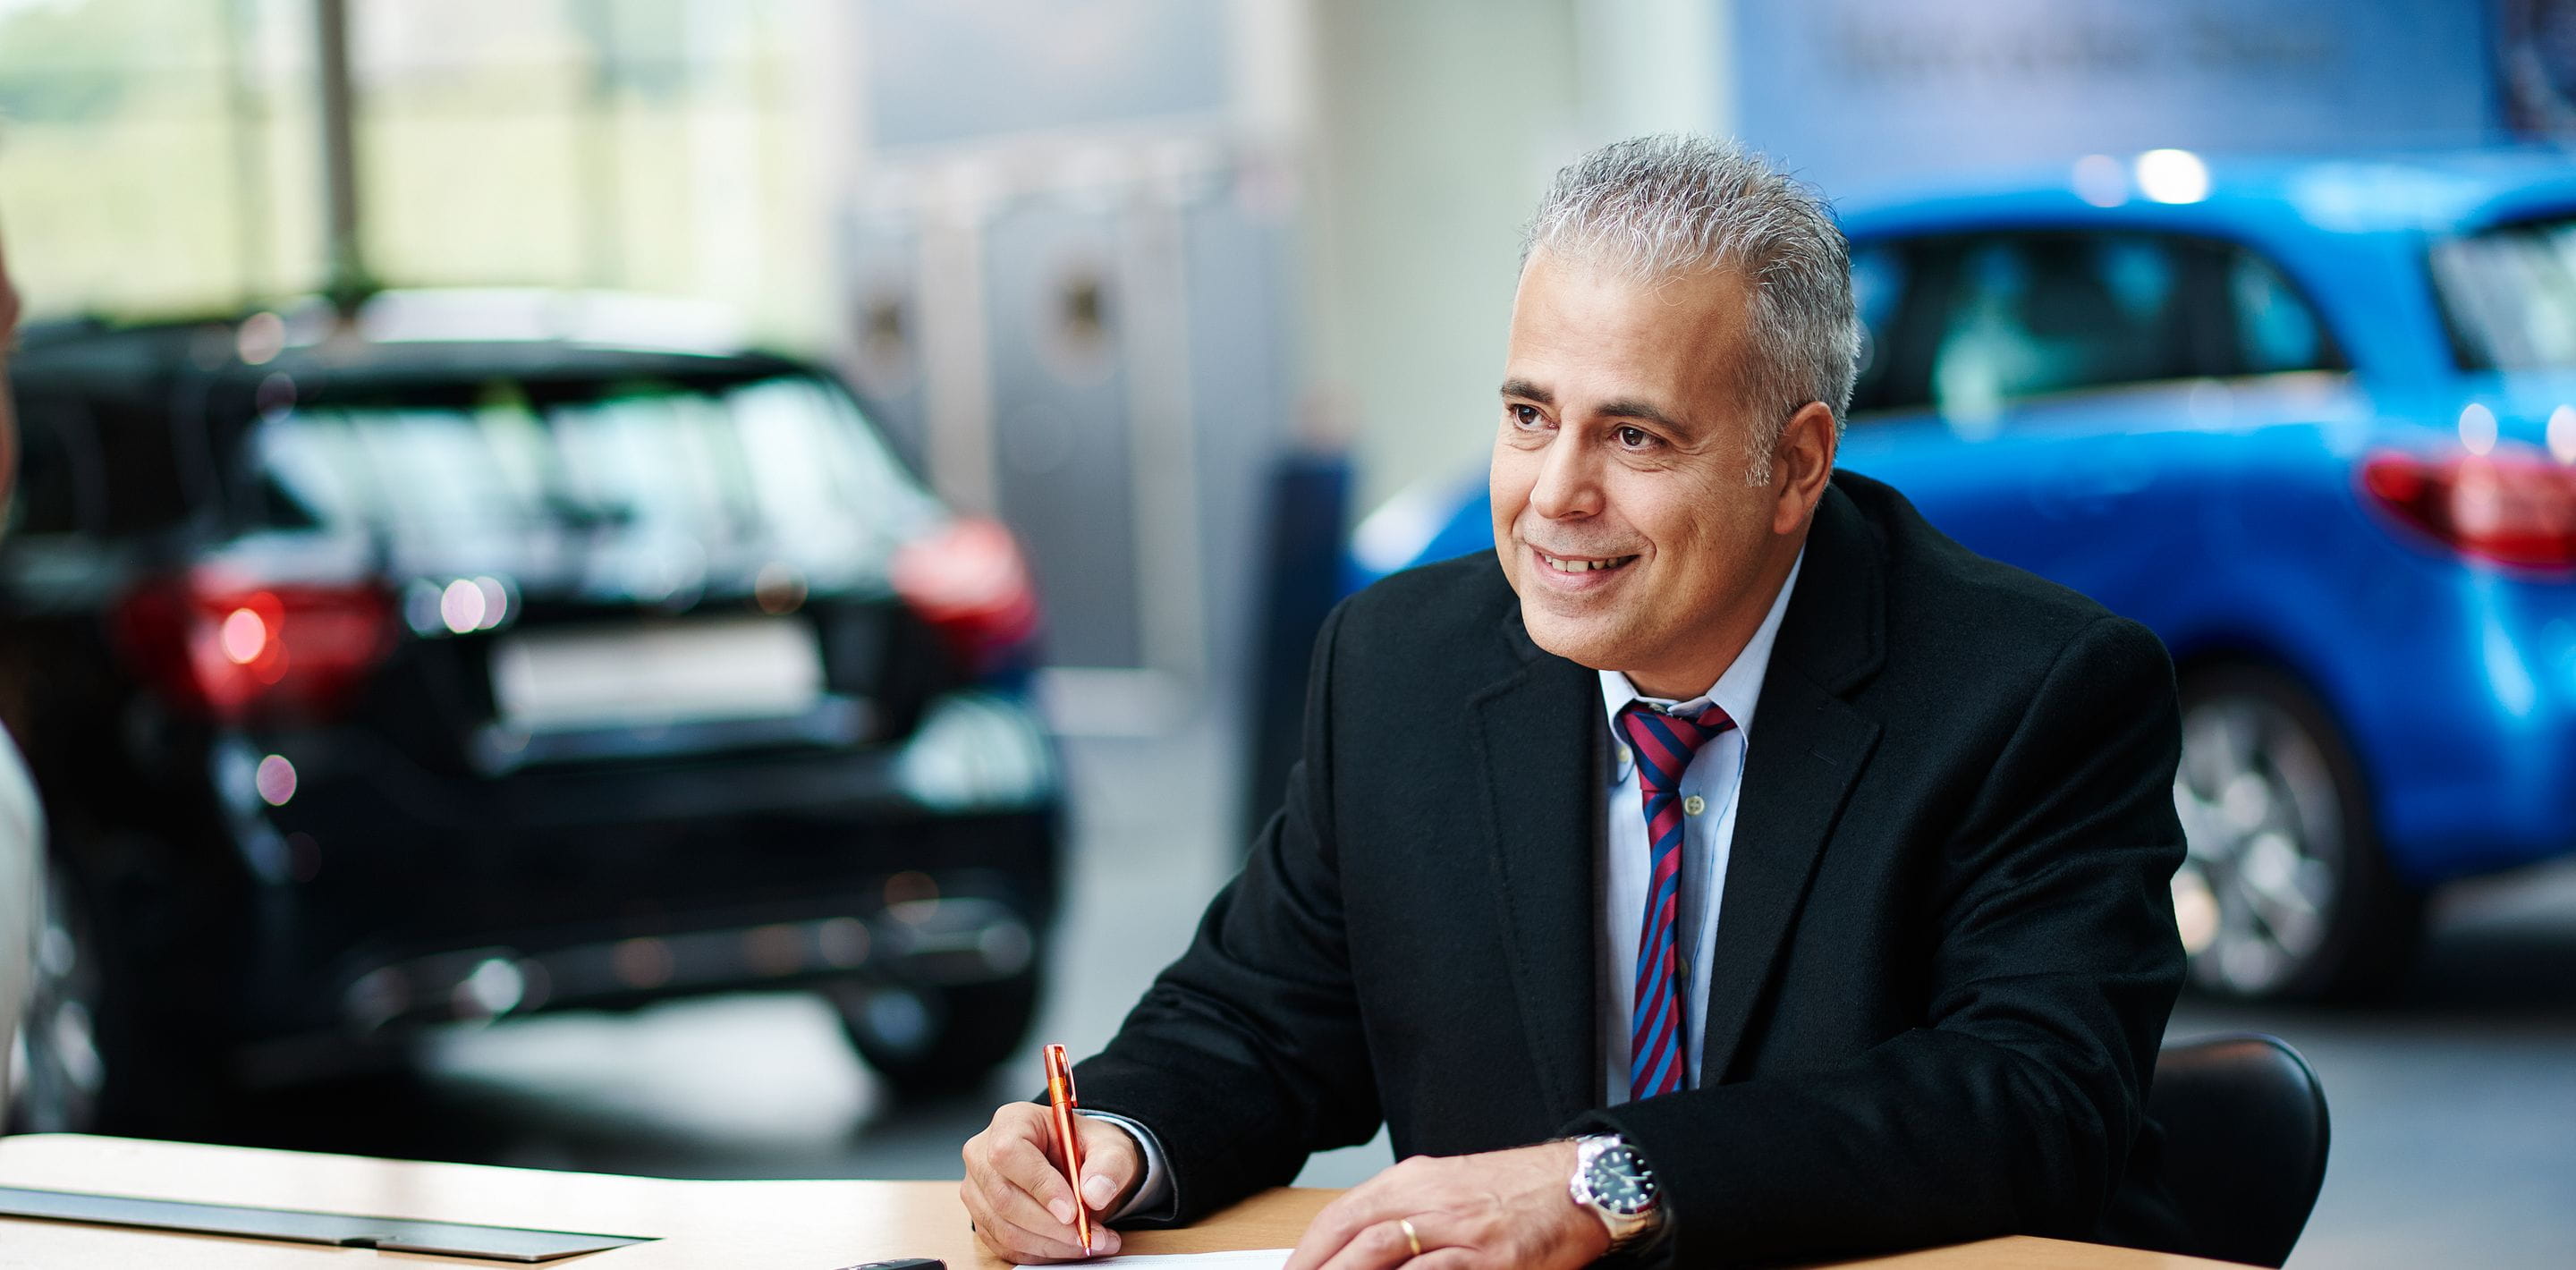 Dealership - man signing papers - cars in background